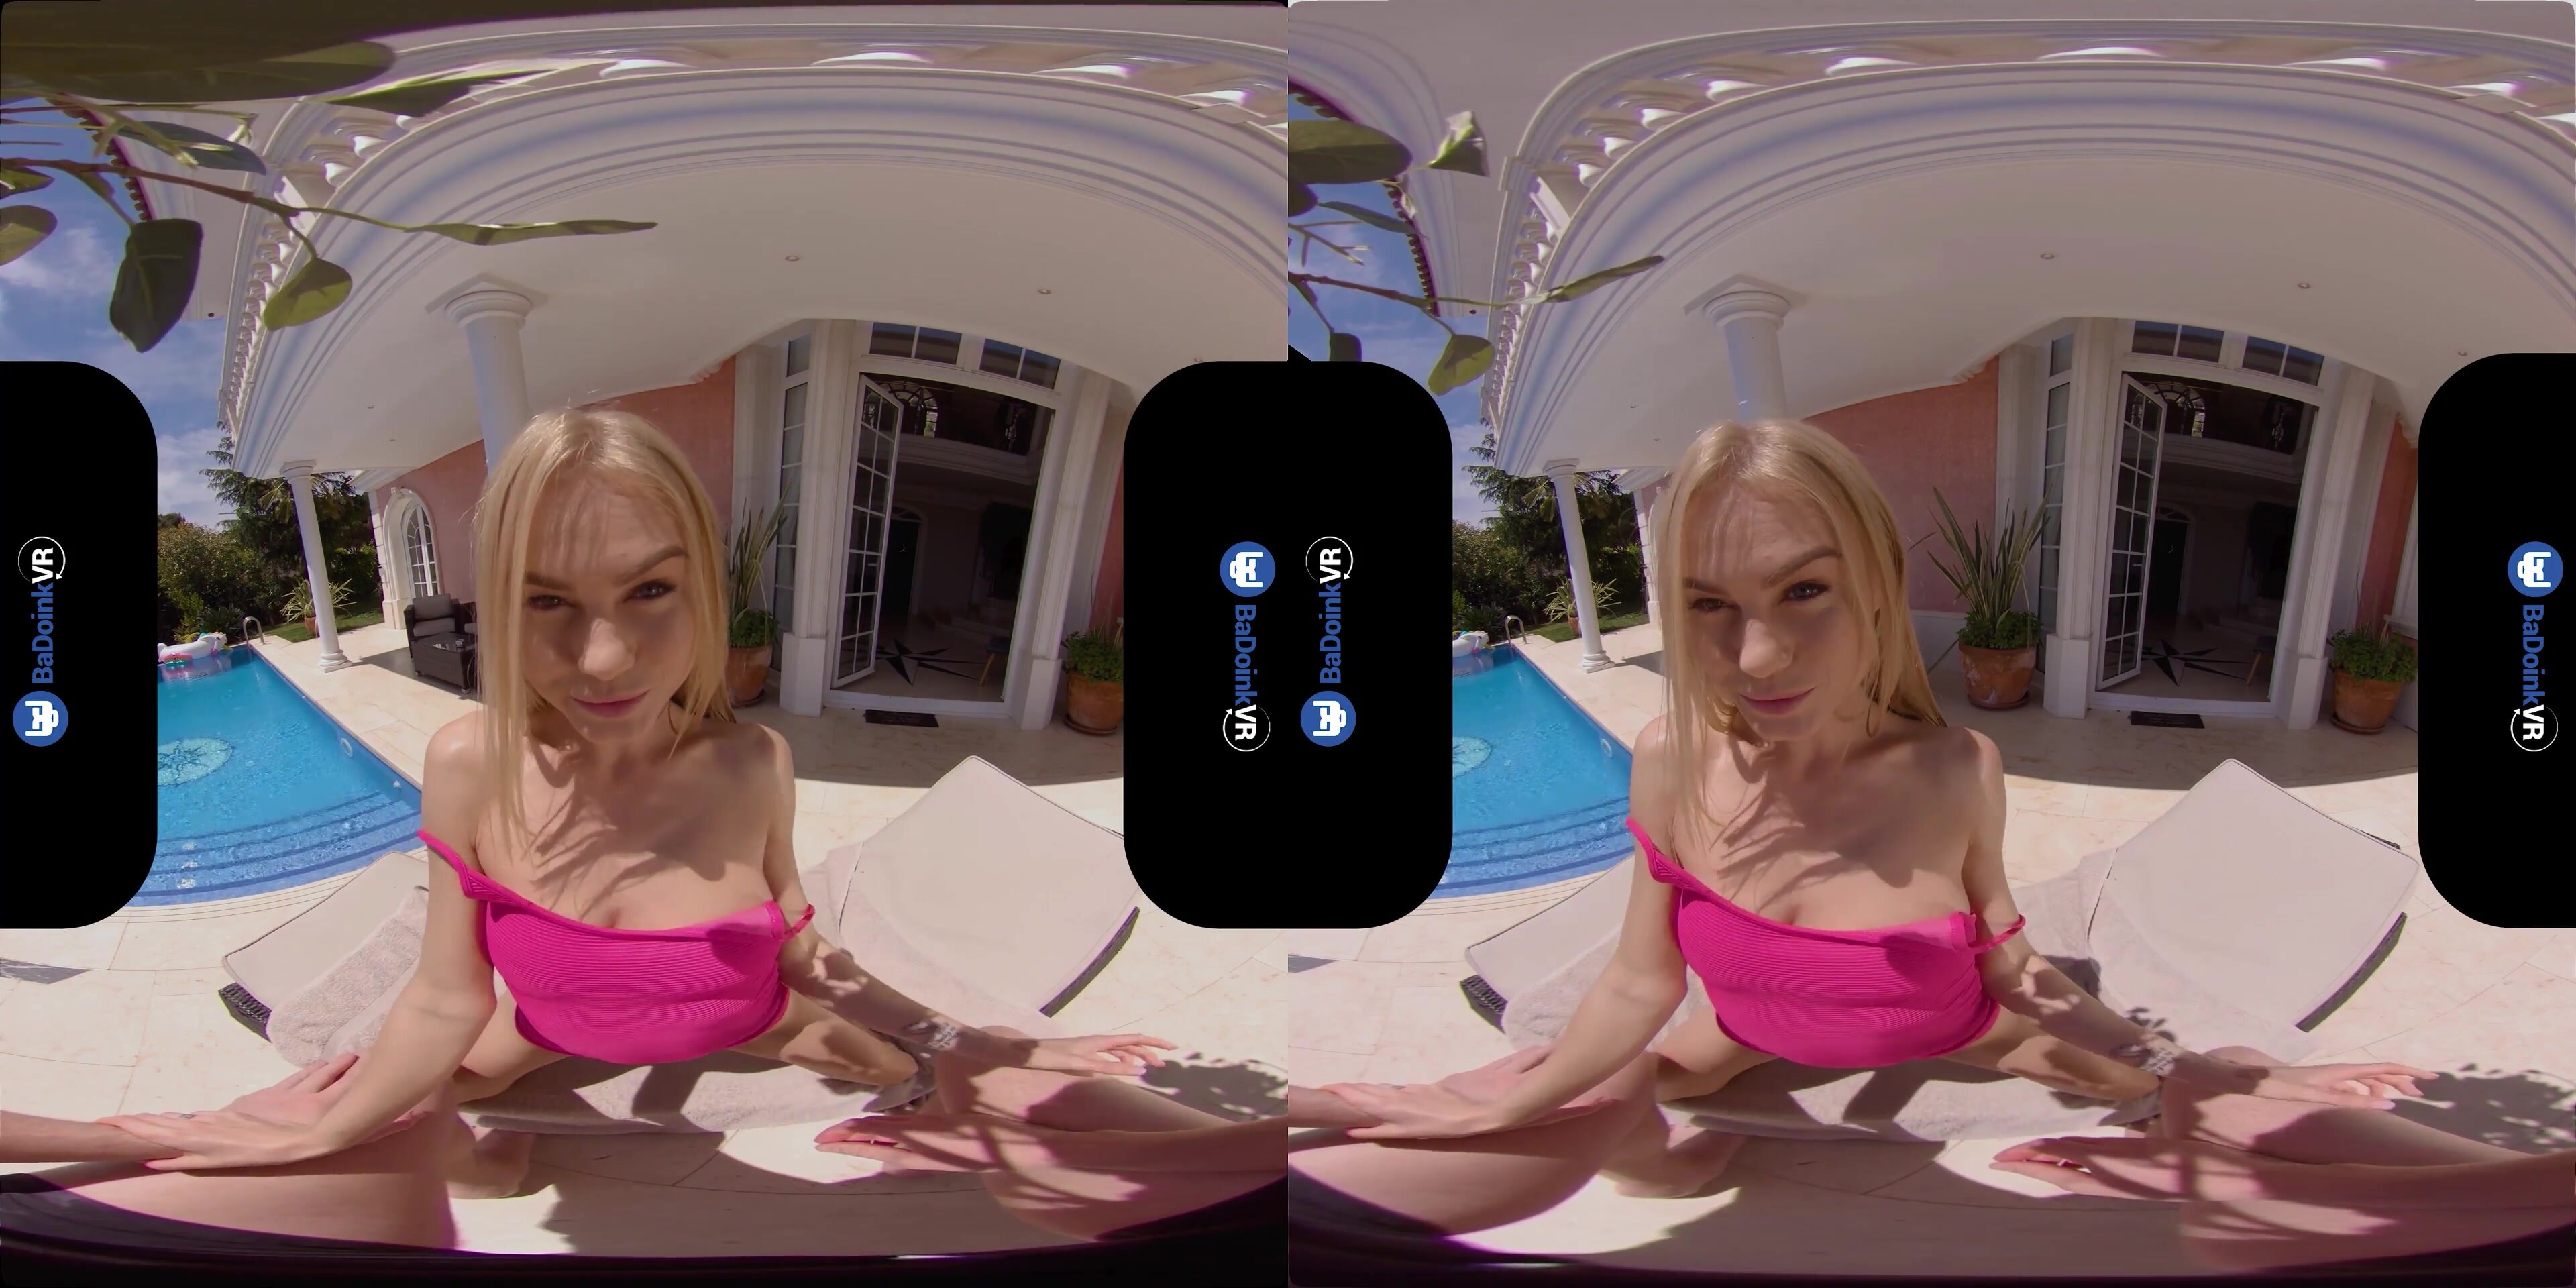 Compilation of Summer Hot Babes by the Pool VR